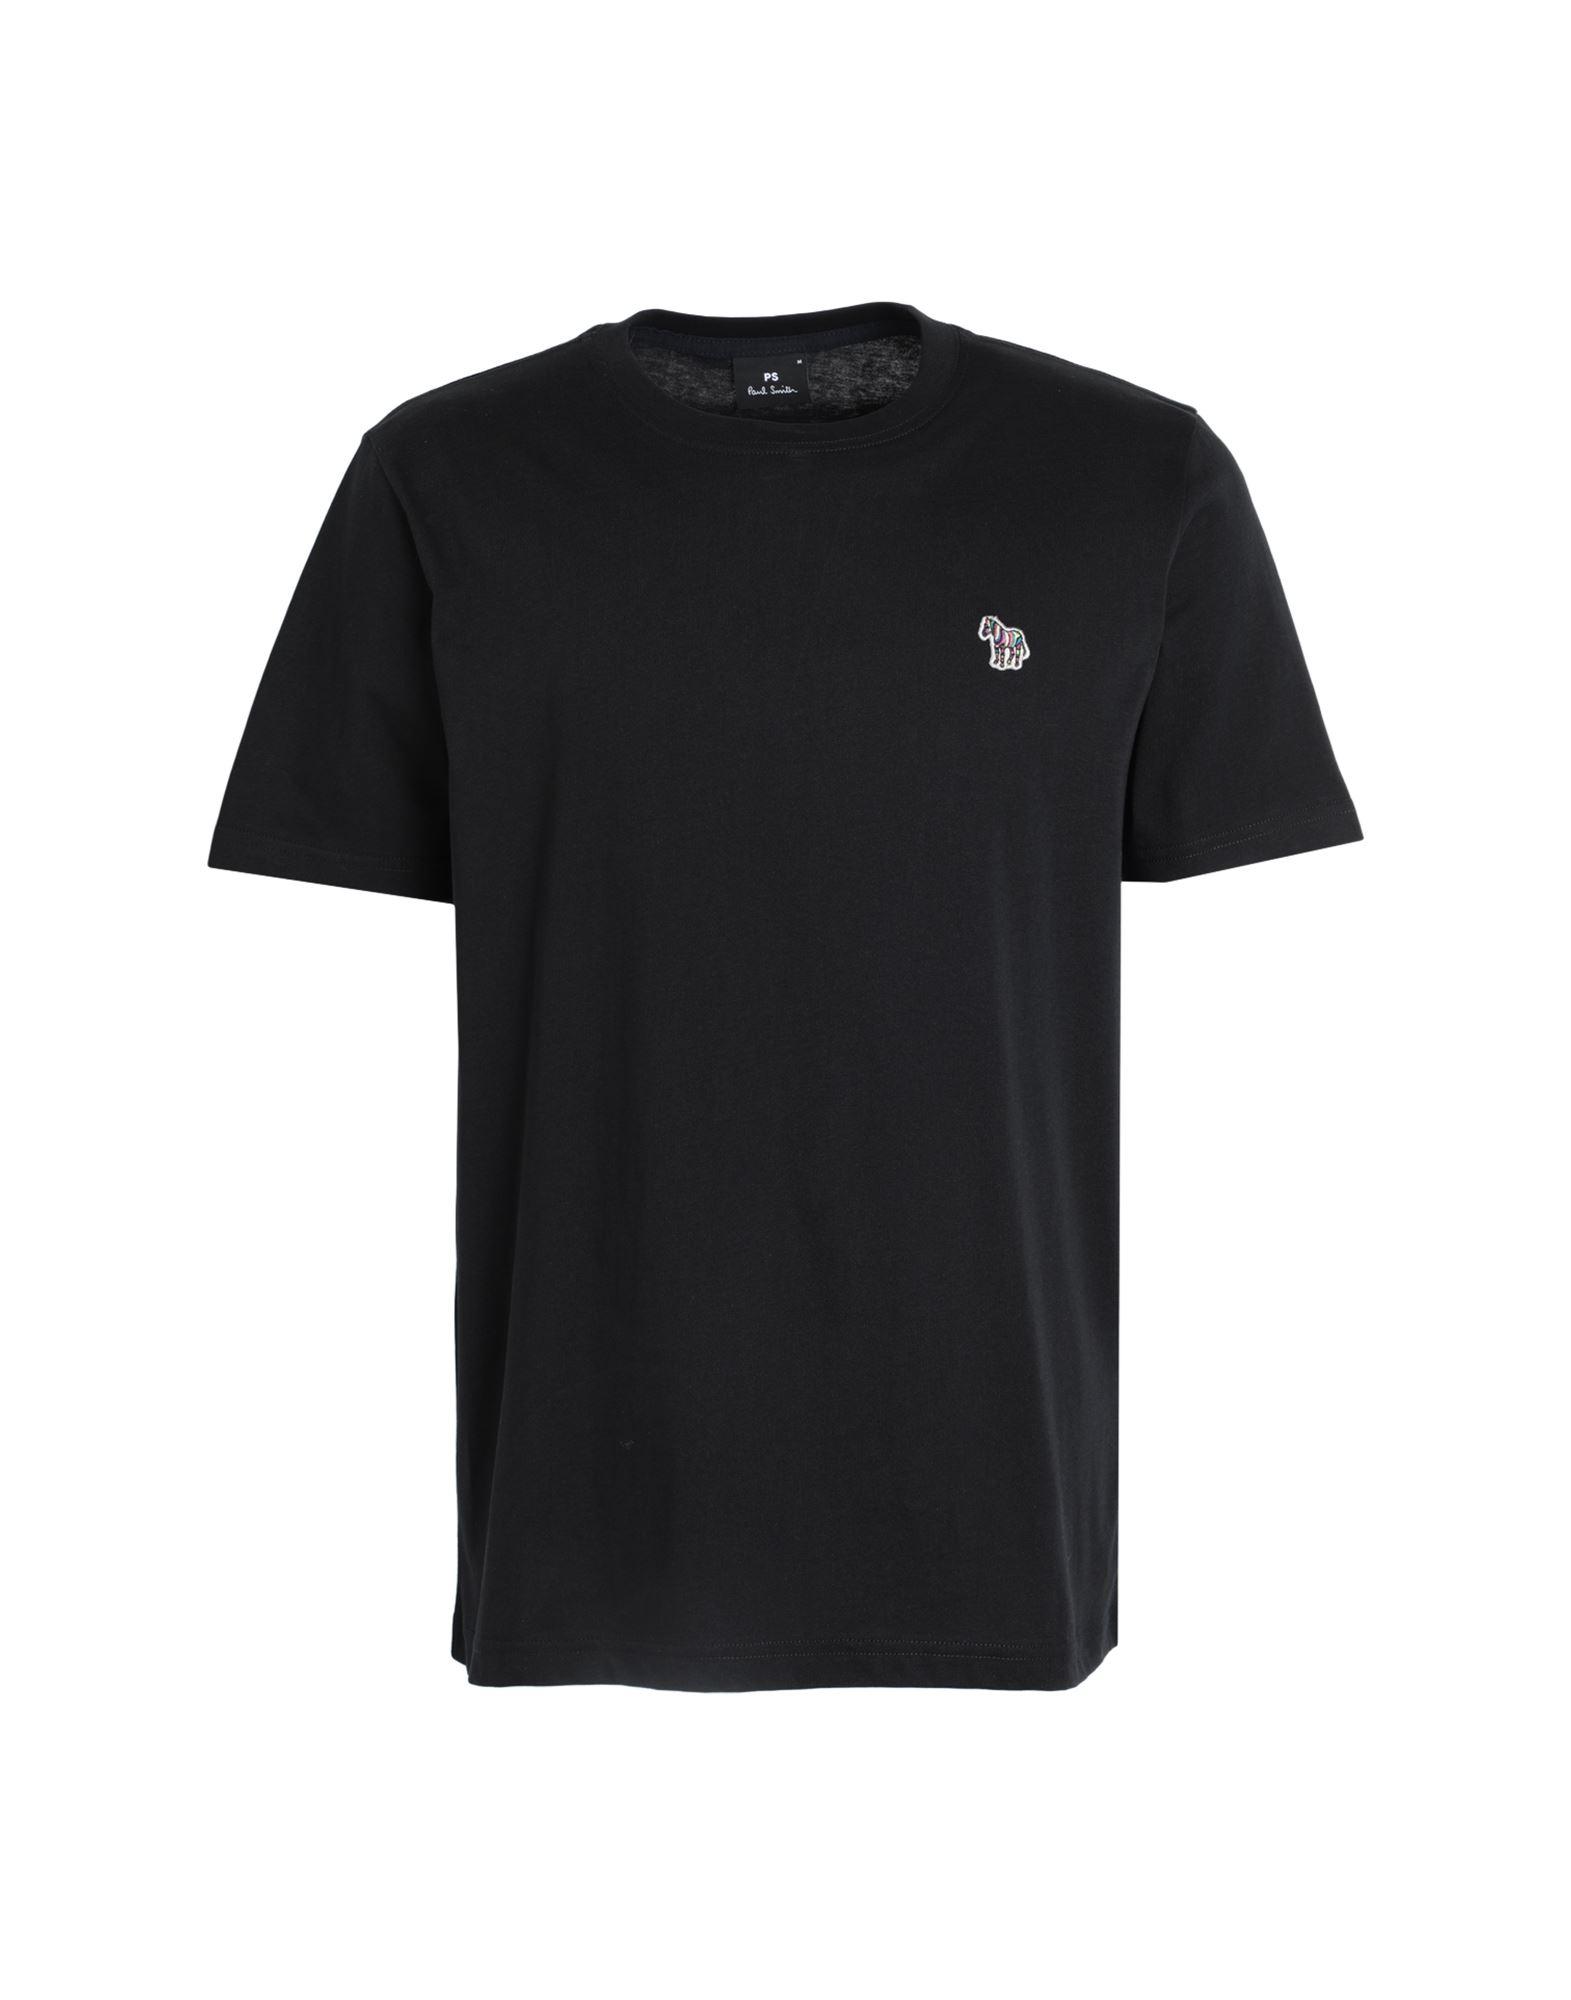 PS by Paul Smith T-shirt in Black for Men | Lyst